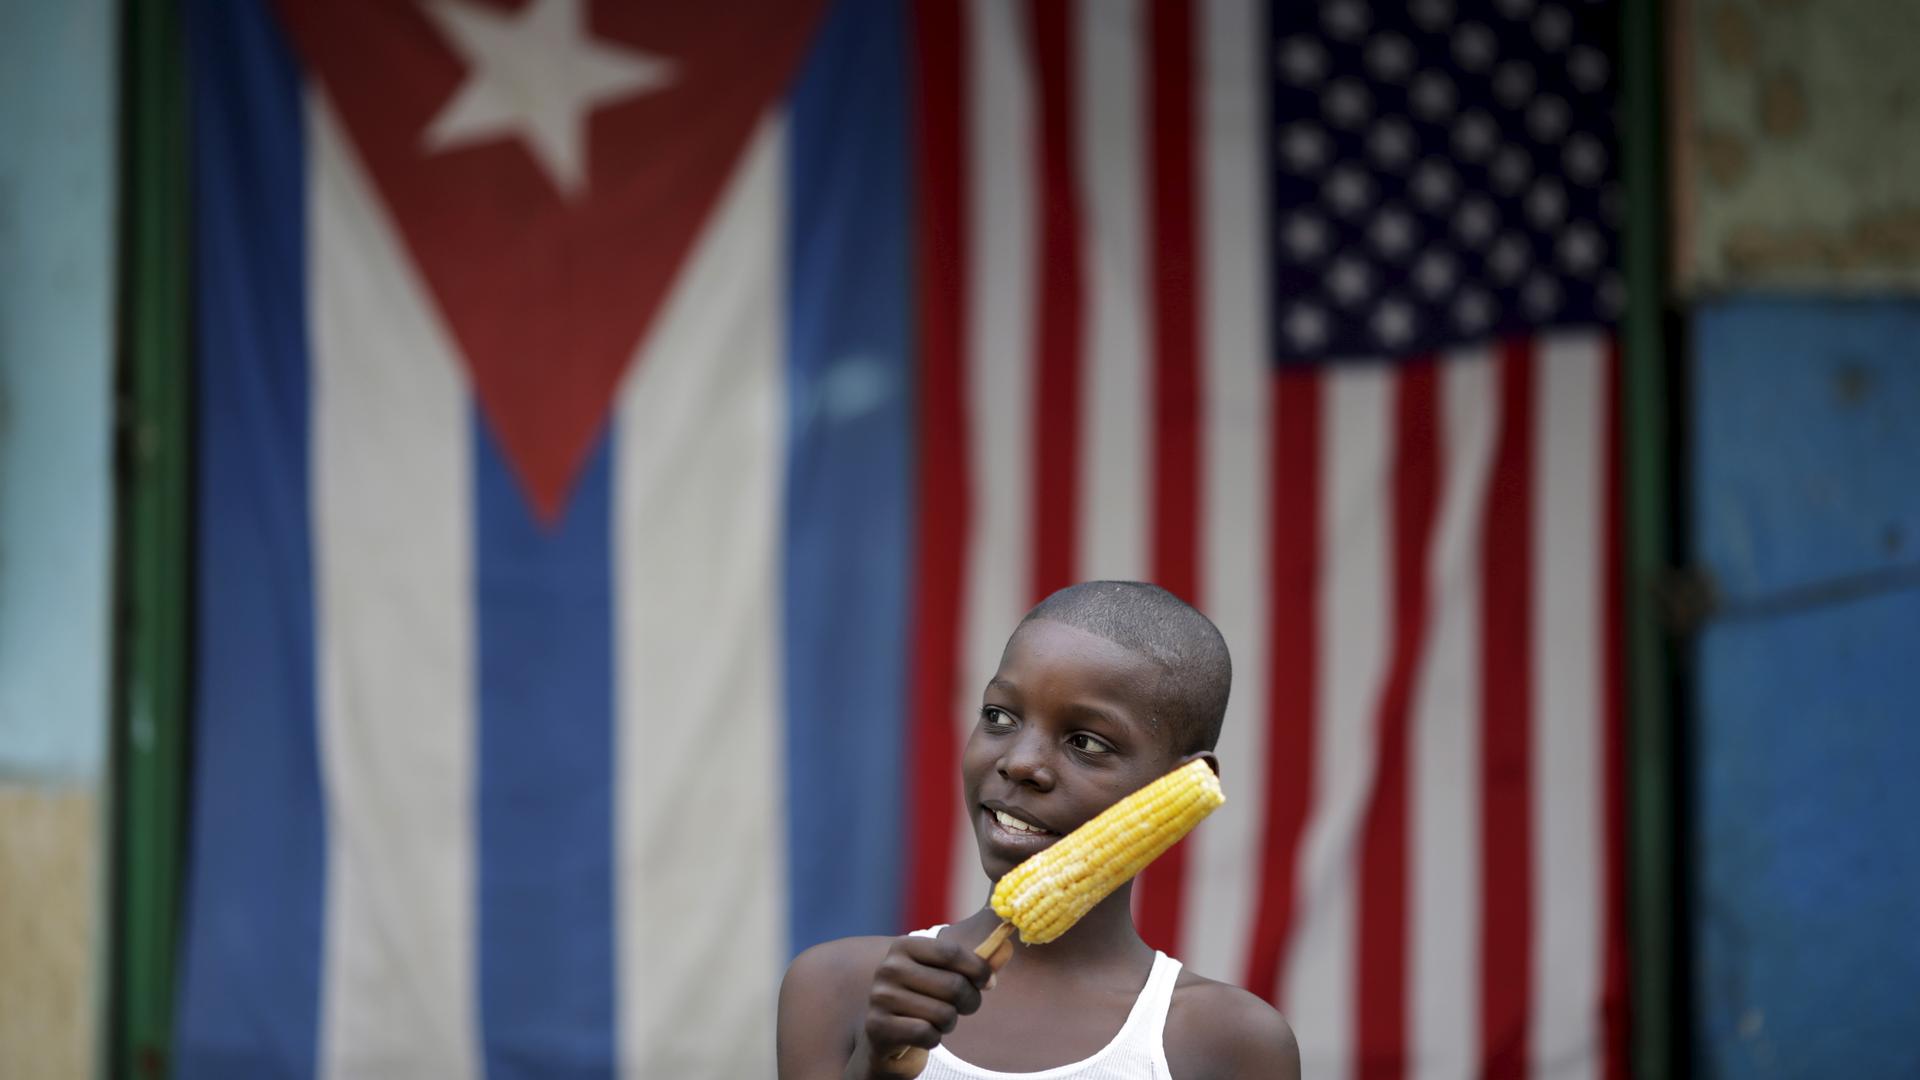 Jimmy Blanco, 9, holds a corncob in front of the Cuban and the U.S. flags in Havana, March 23, 2016. Struggling under a US embargo, many Cubans hope an easing of US-Cuban trade relations will bring material improvements to their lives.